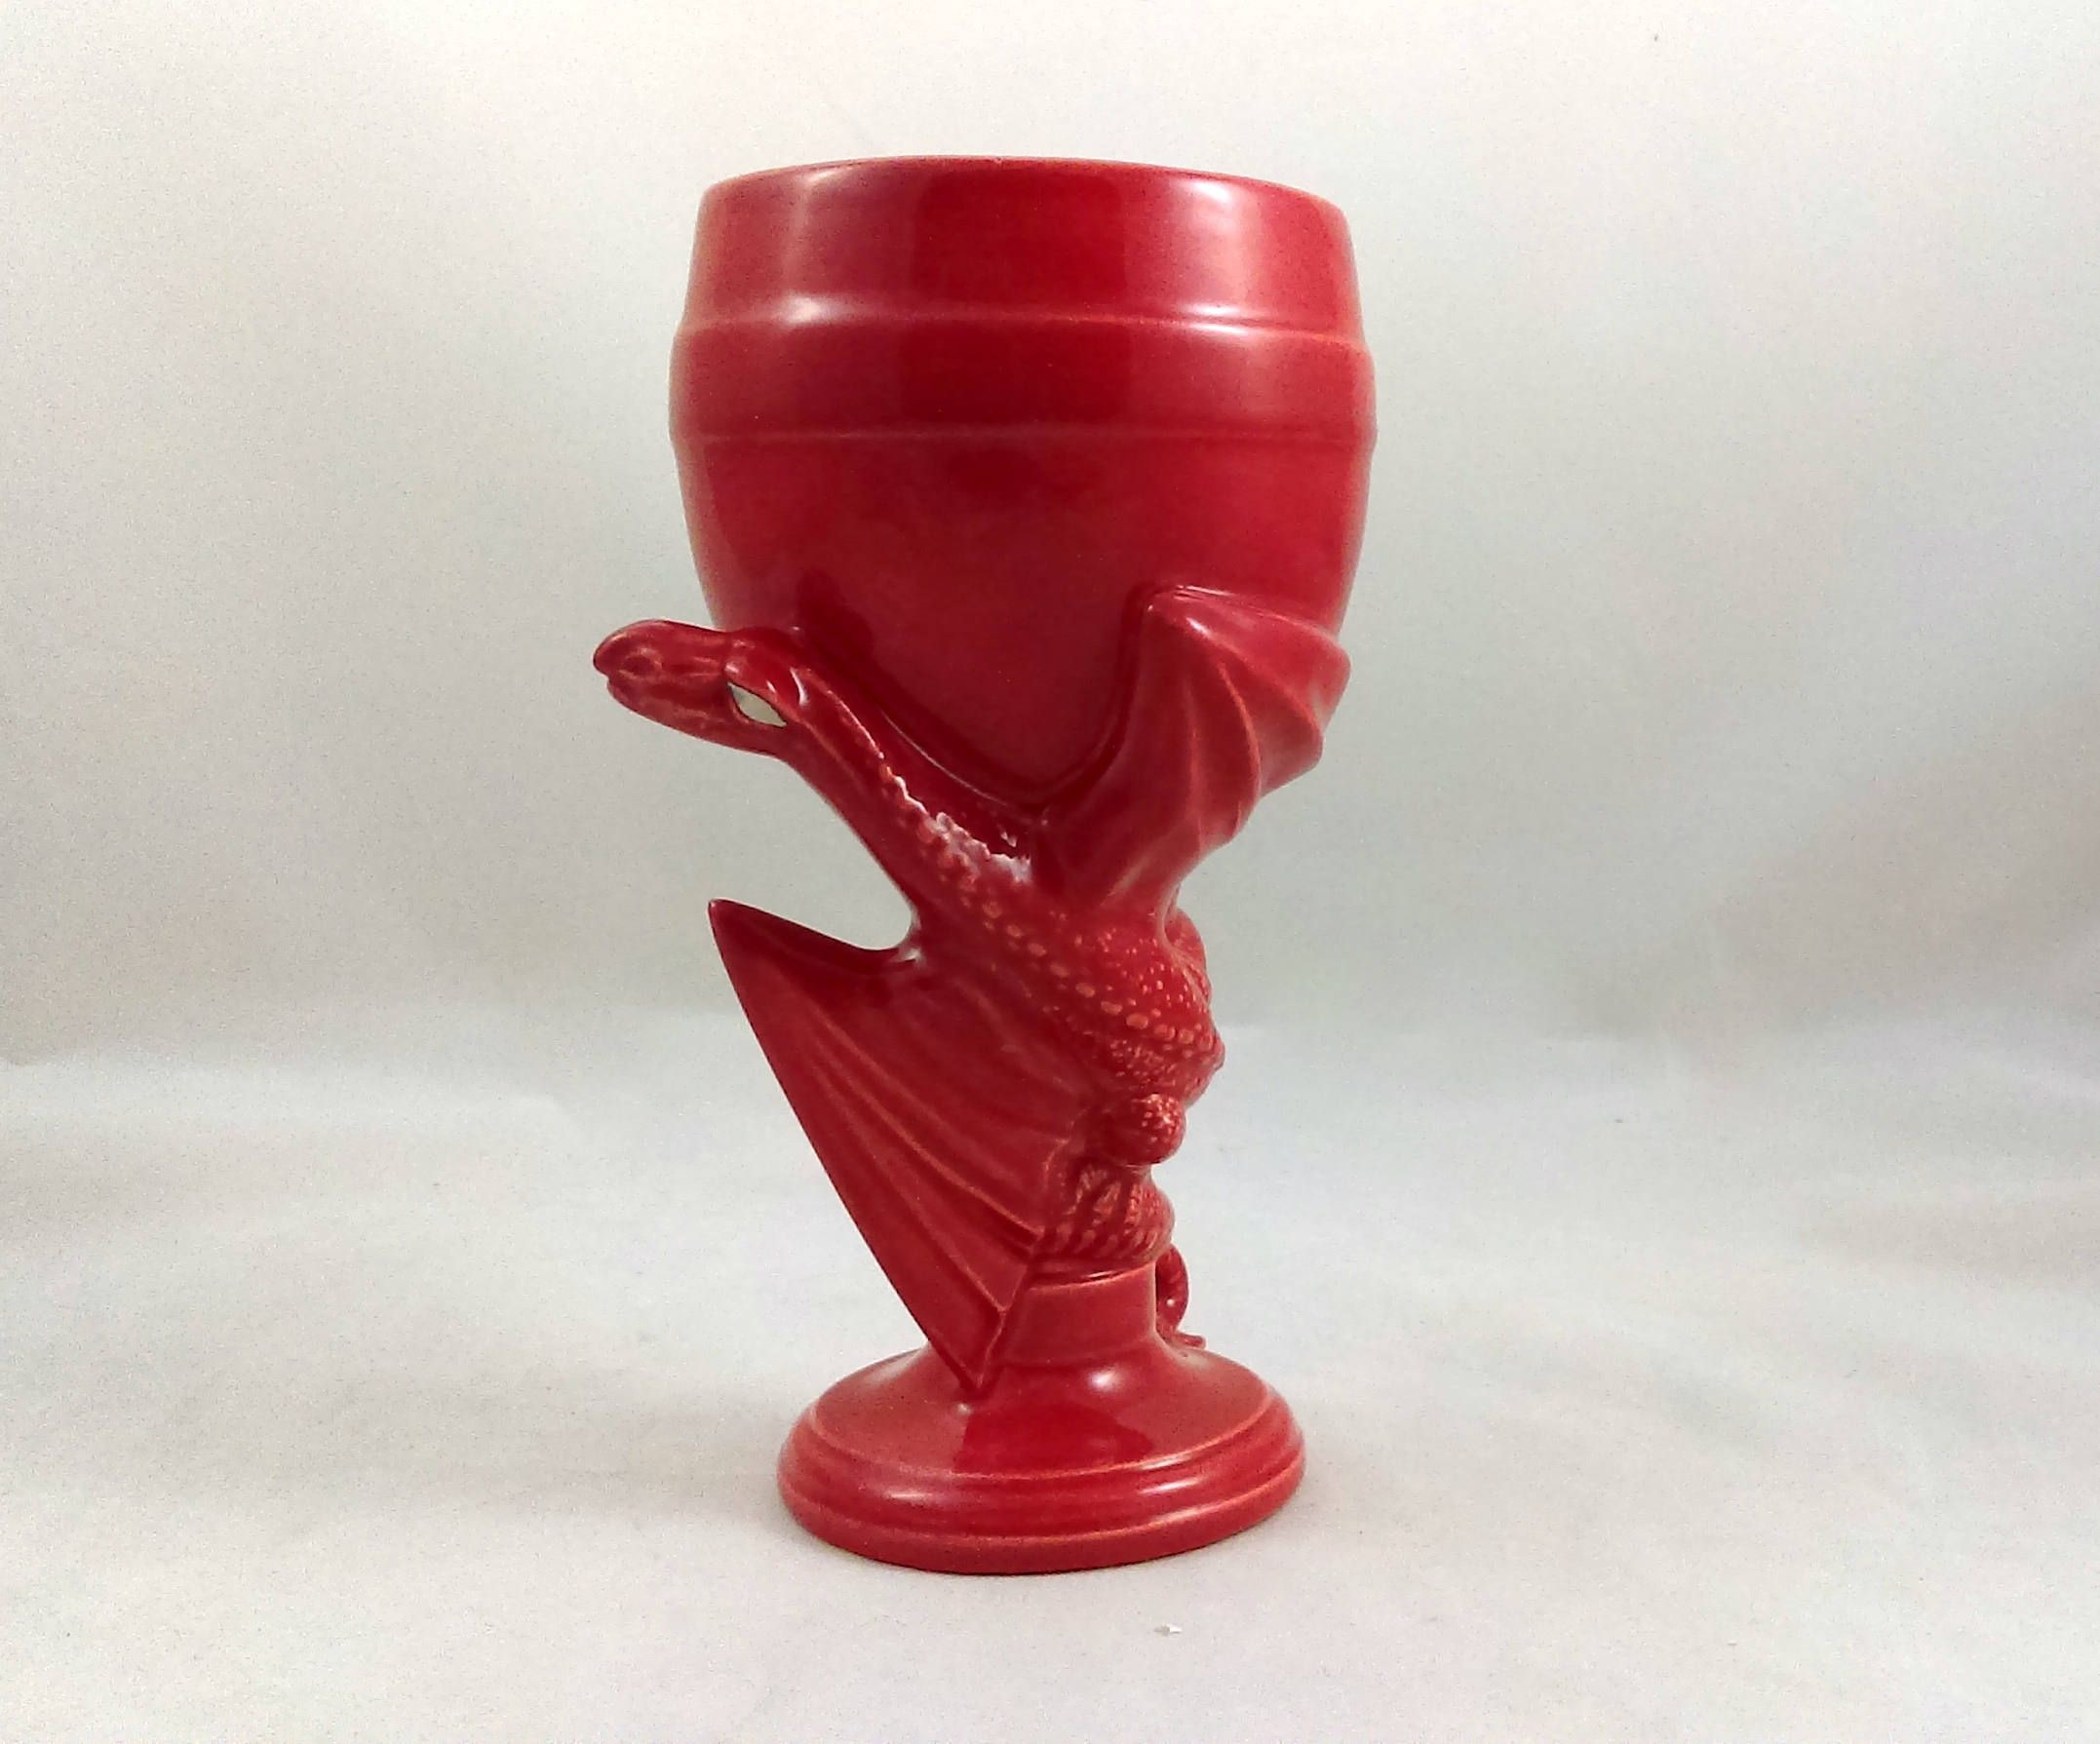 11 Perfect Red and White Glass Vase 2024 free download red and white glass vase of ready to ship red ceramic dragon goblet or glass with white gold pertaining to ready to ship red ceramic dragon goblet or glass with white gold mirror effect eyes